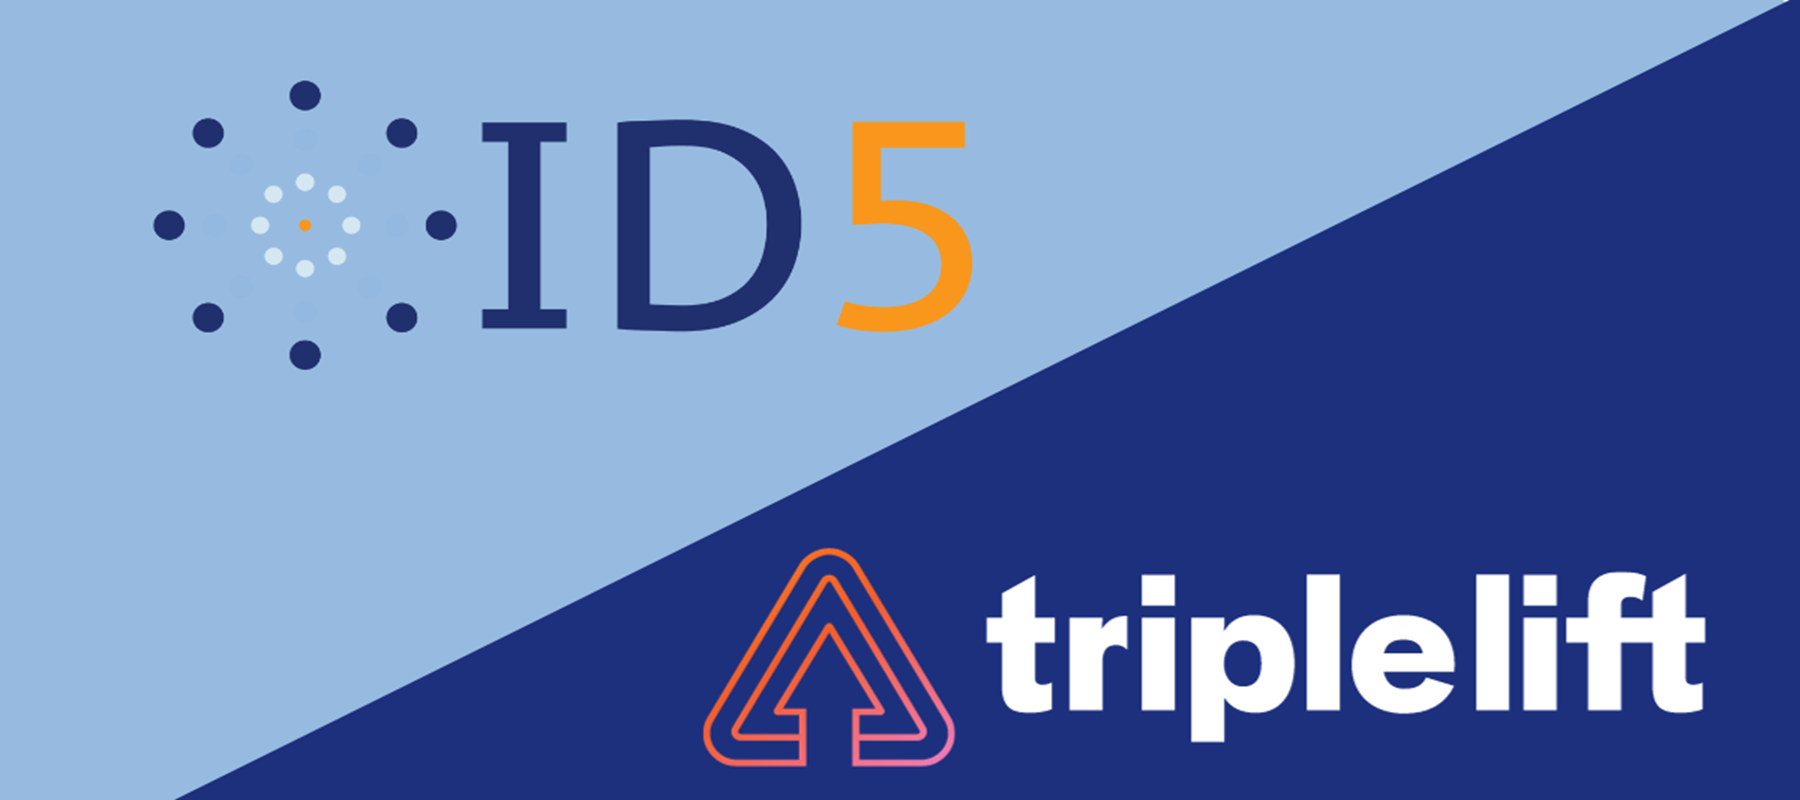 TripleLift partners with ID5 to advance advertiser targeting across the open web